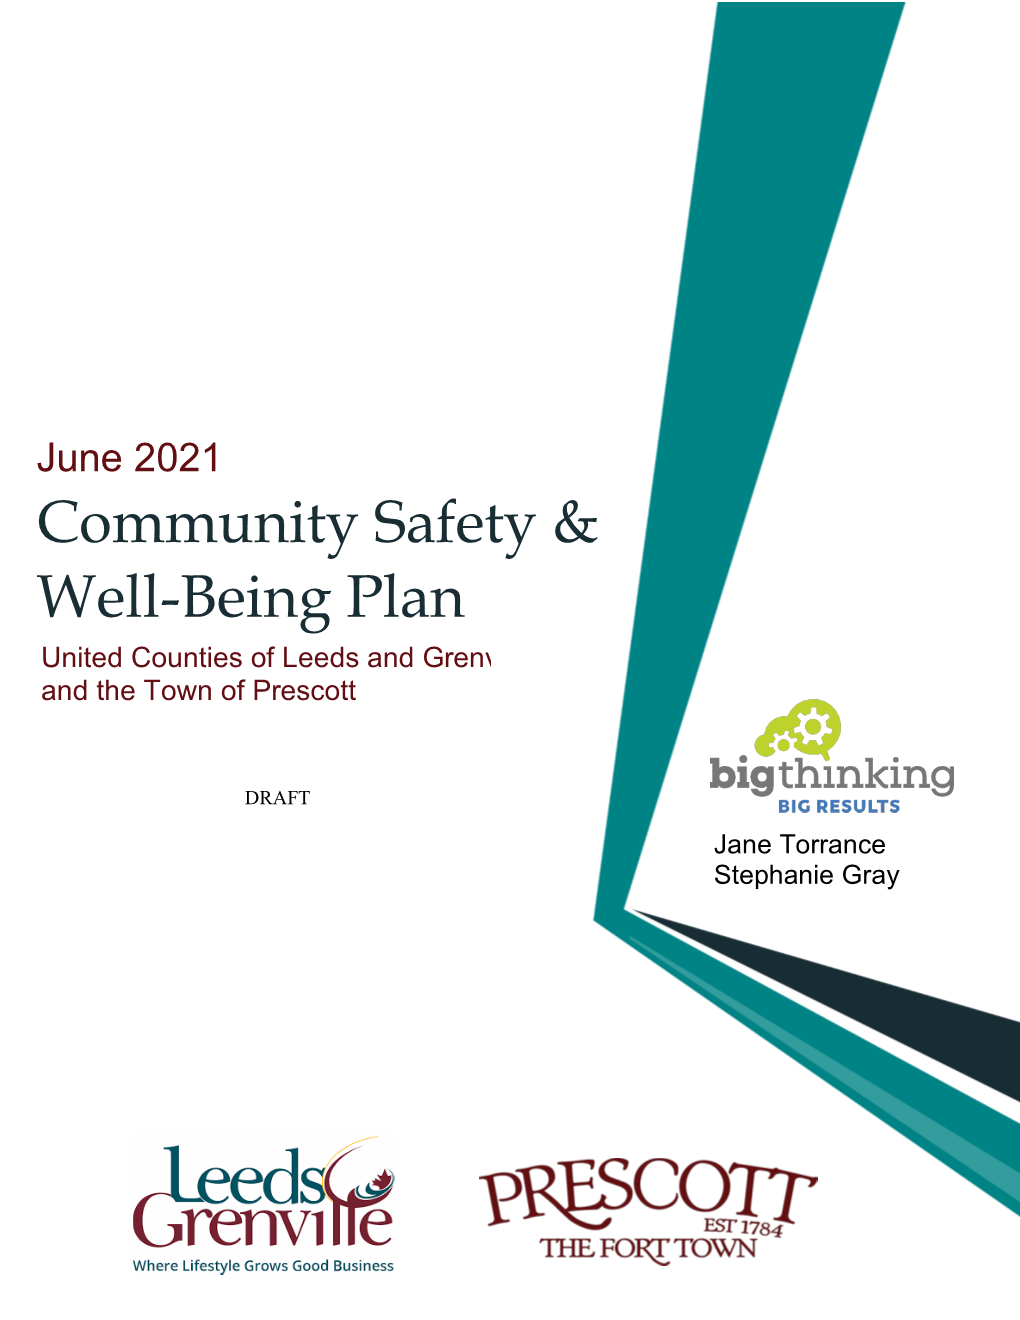 DRAFT-Community-Safety-And-Well-Being-Leeds-Grenville-Part-1